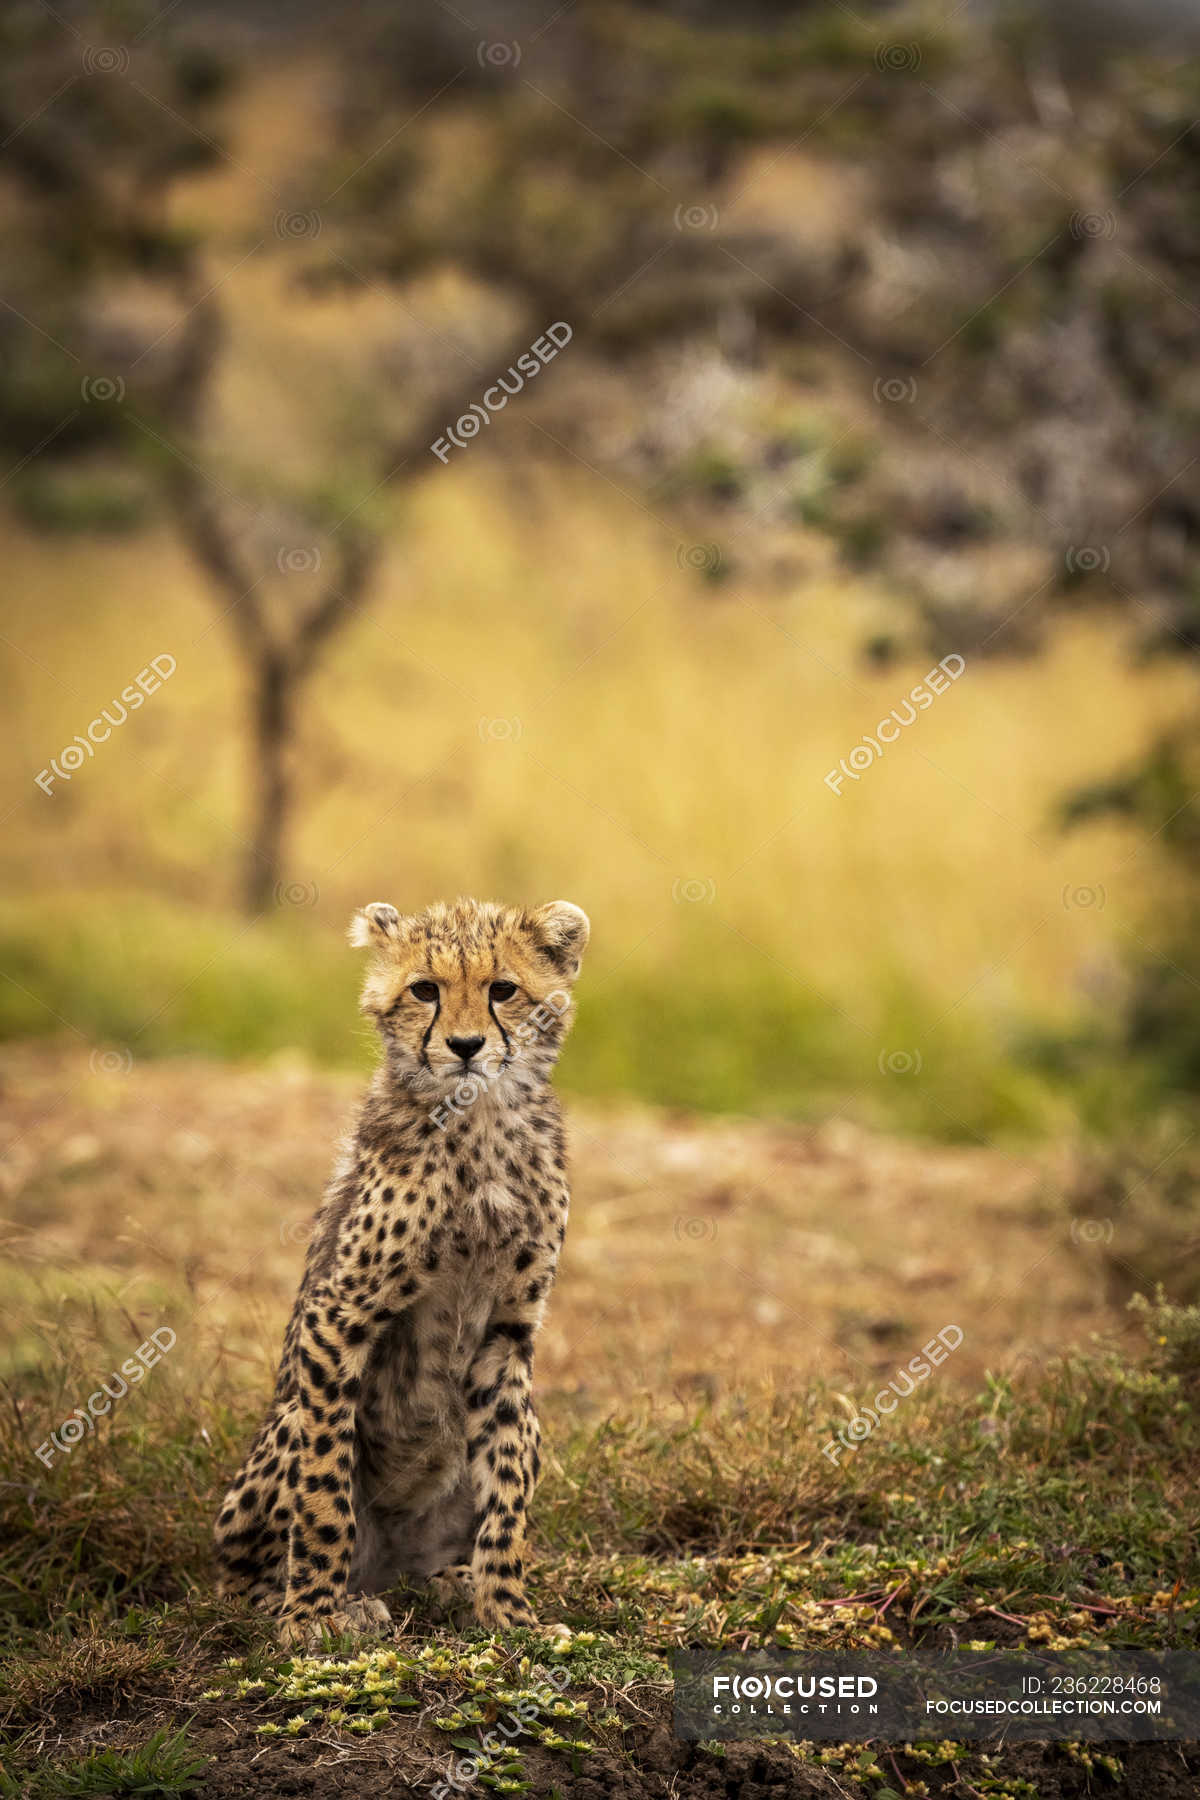 robot Bange for at dø Majroe Cute leopard sitting at wild nature, blurred background — predator, zoo -  Stock Photo | #236228468